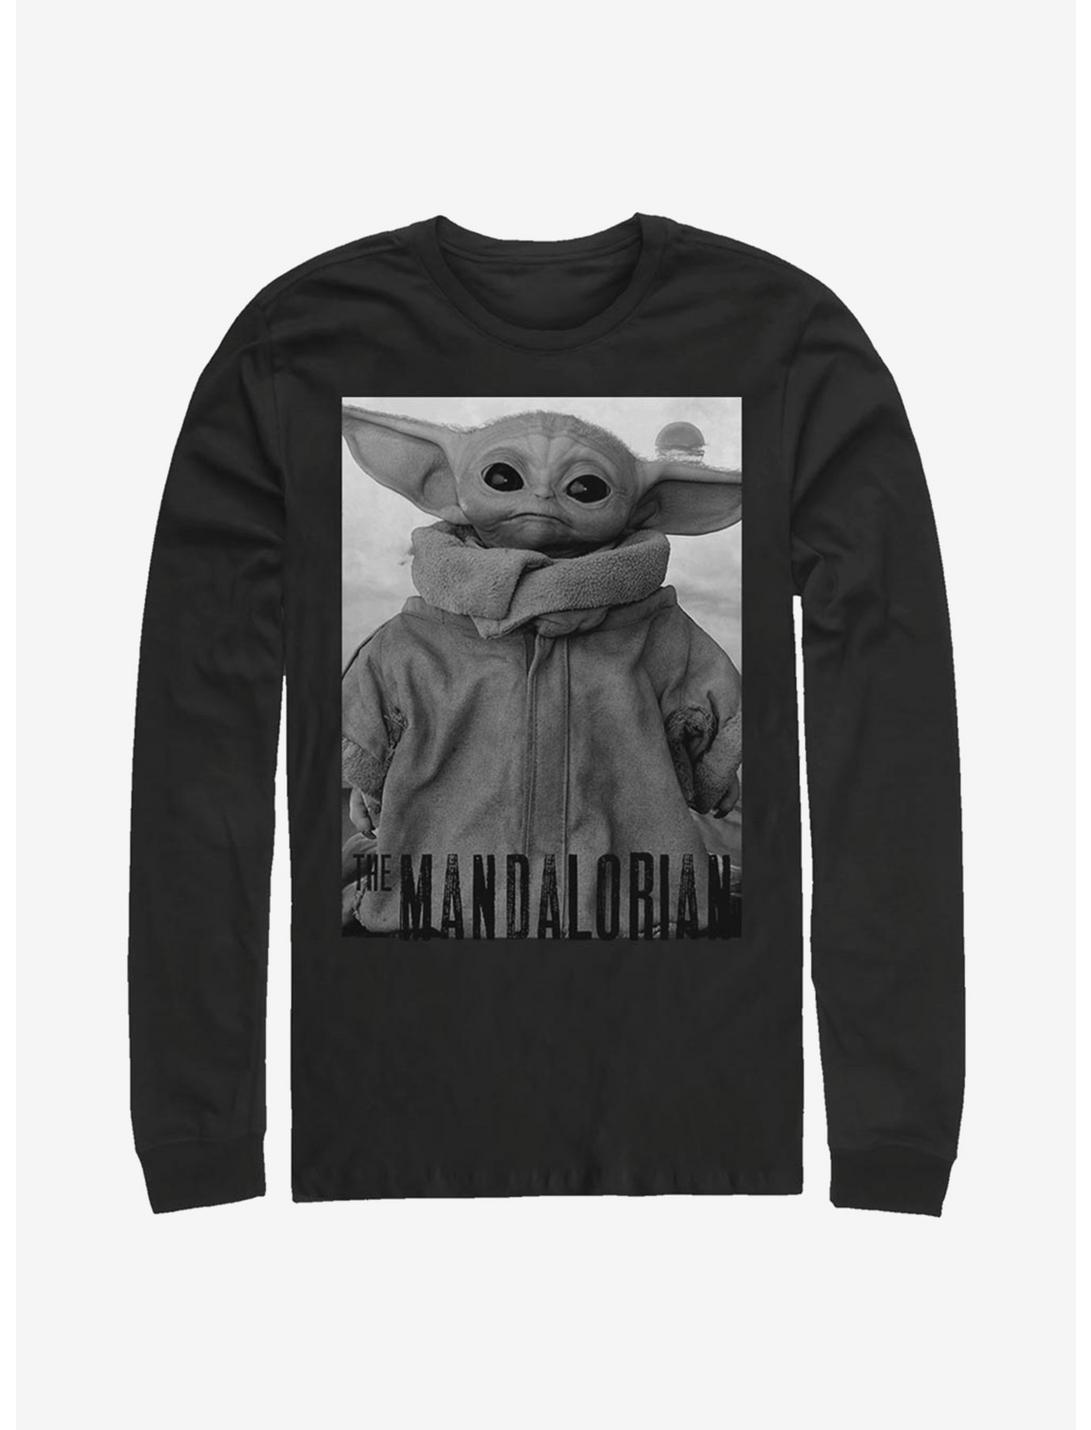 Star Wars The Mandalorian The Child Only One Long-Sleeve T-Shirt, BLACK, hi-res